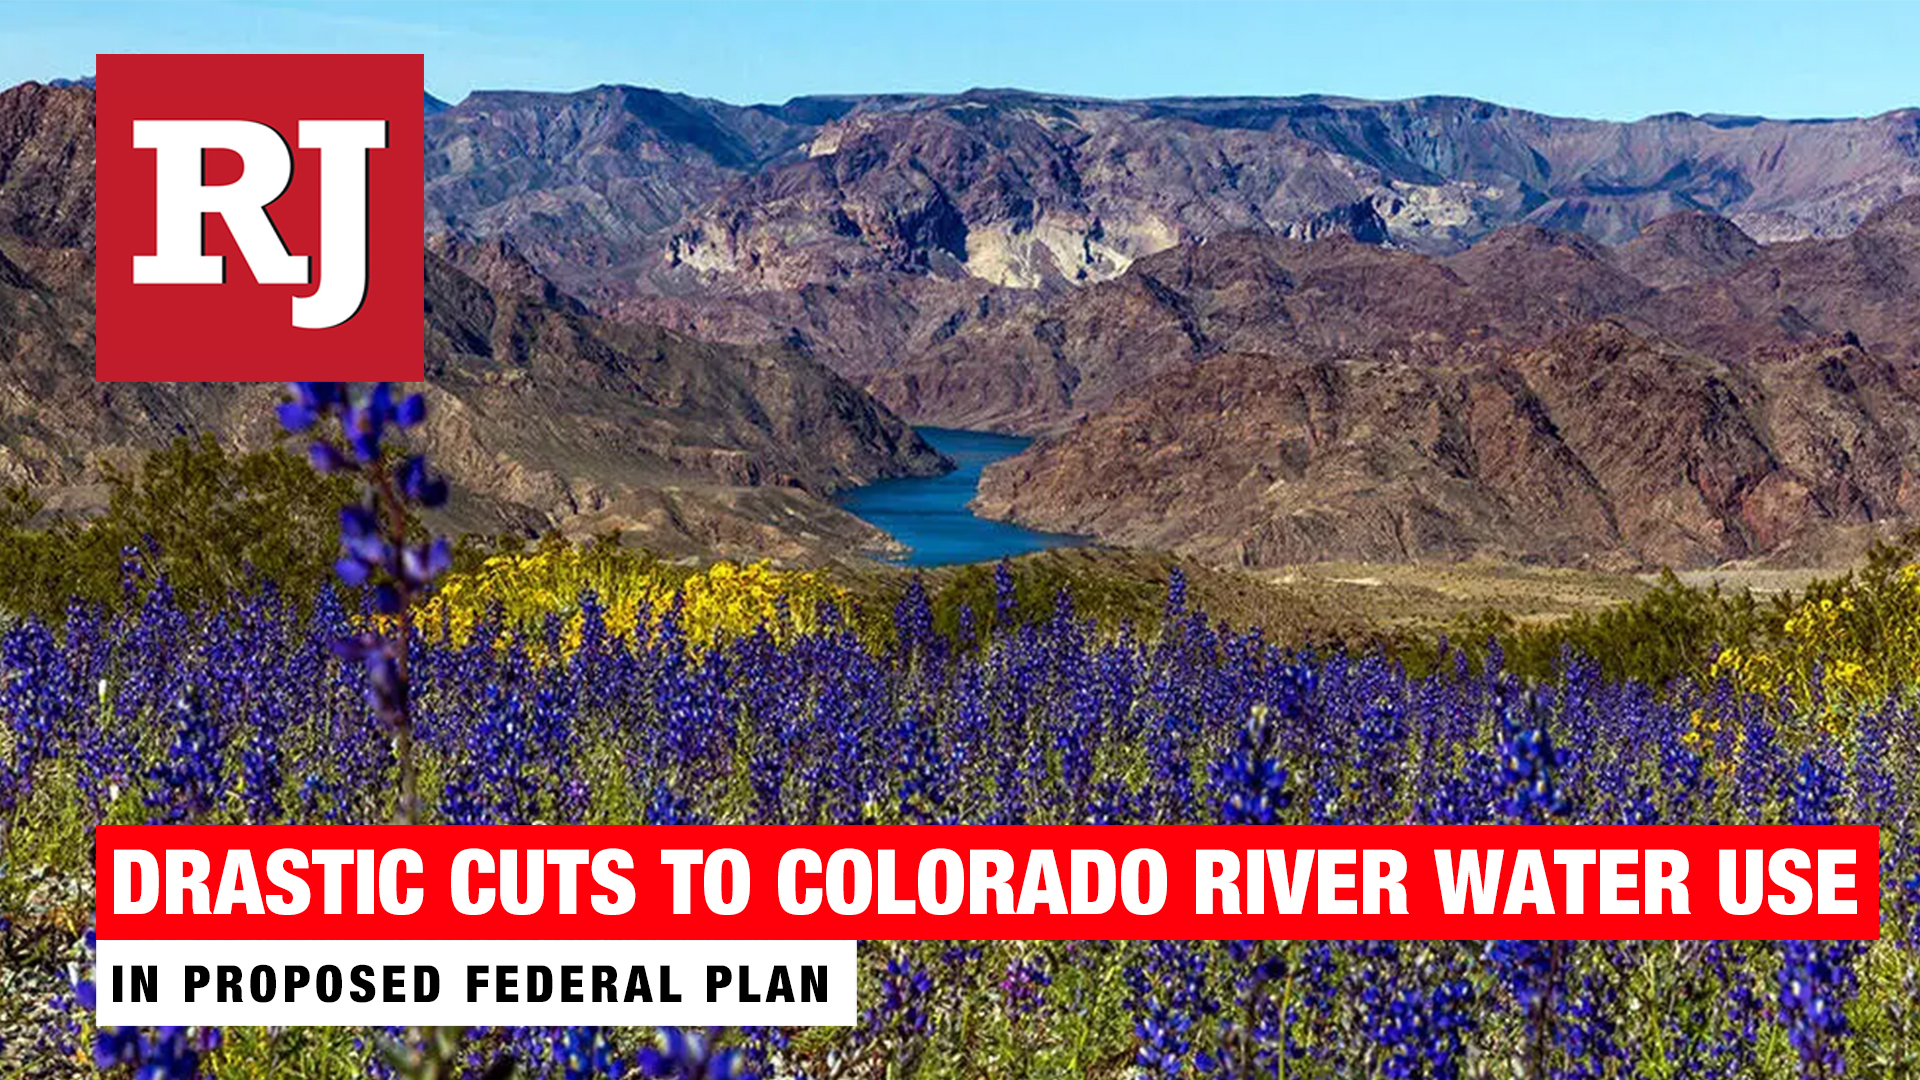 Federal officials propose plan to cut Colorado River water usage